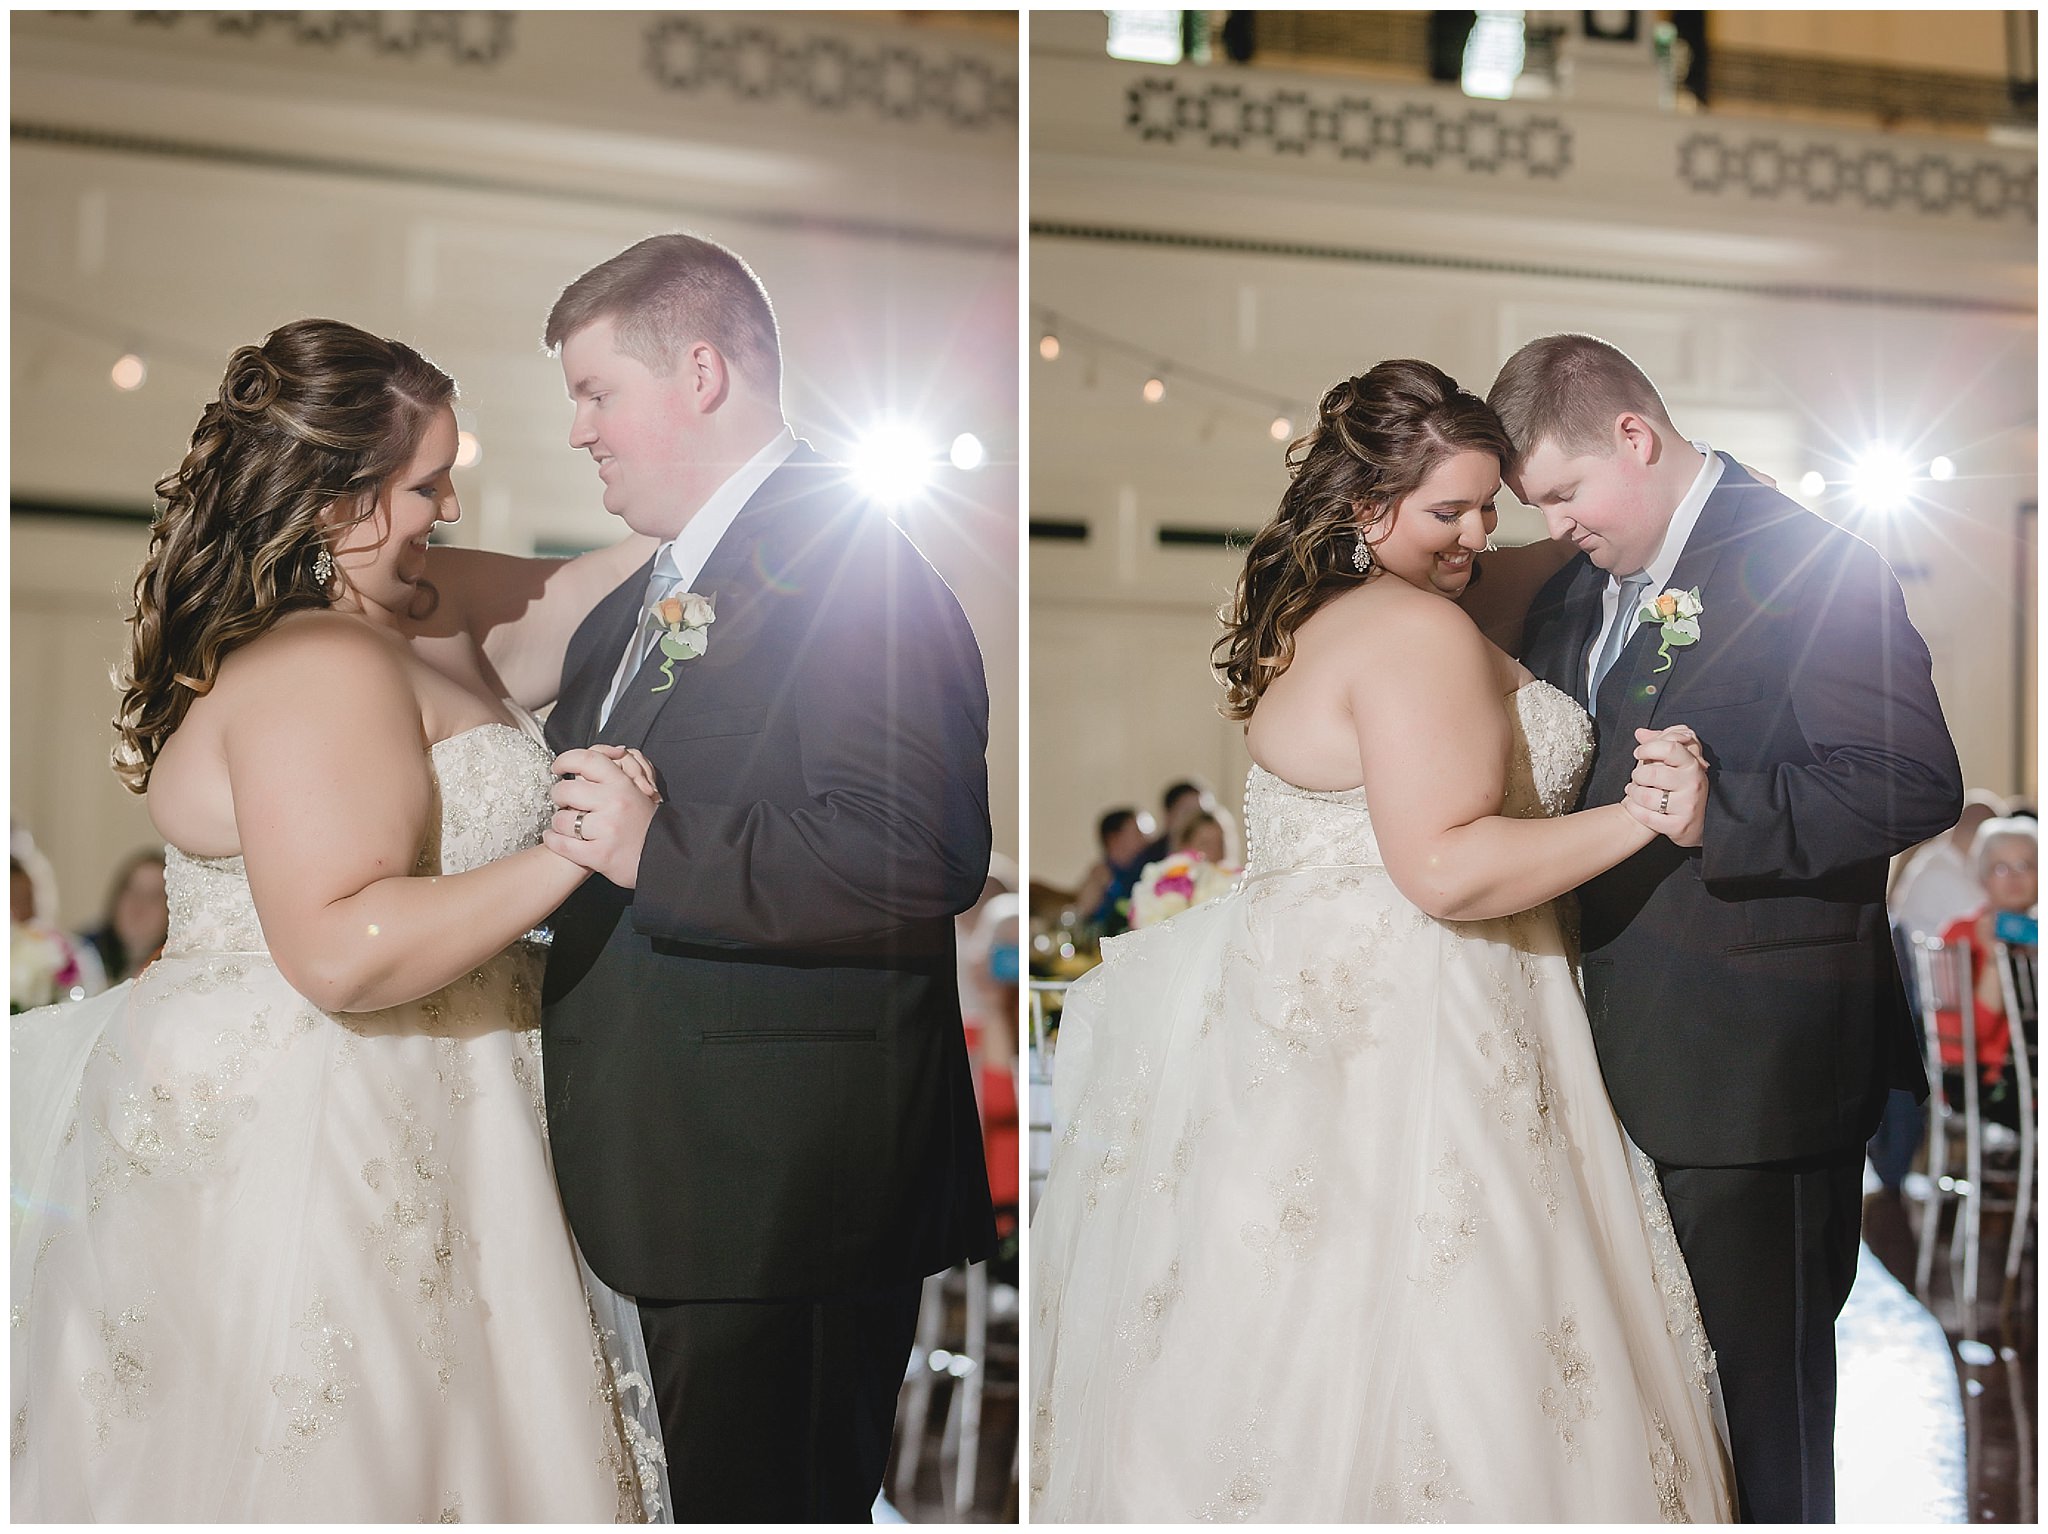 First dance at a Soldiers & Sailors wedding reception